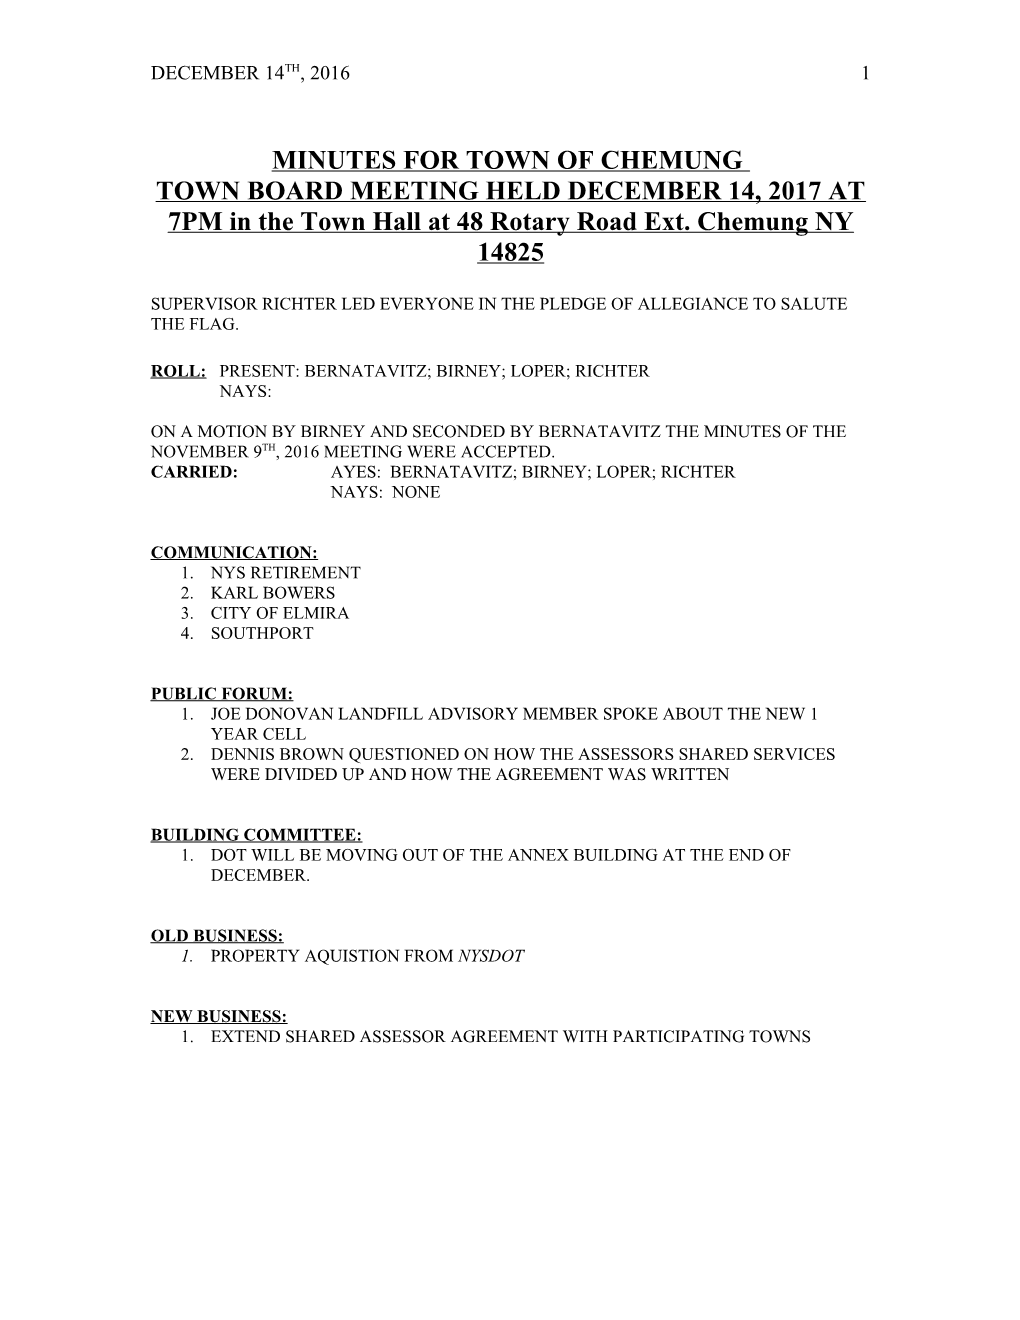 MINUTES for TOWN of CHEMUNG TOWN BOARD MEETING HELD on JULY 10, 2013 at 7PM in the Town s4